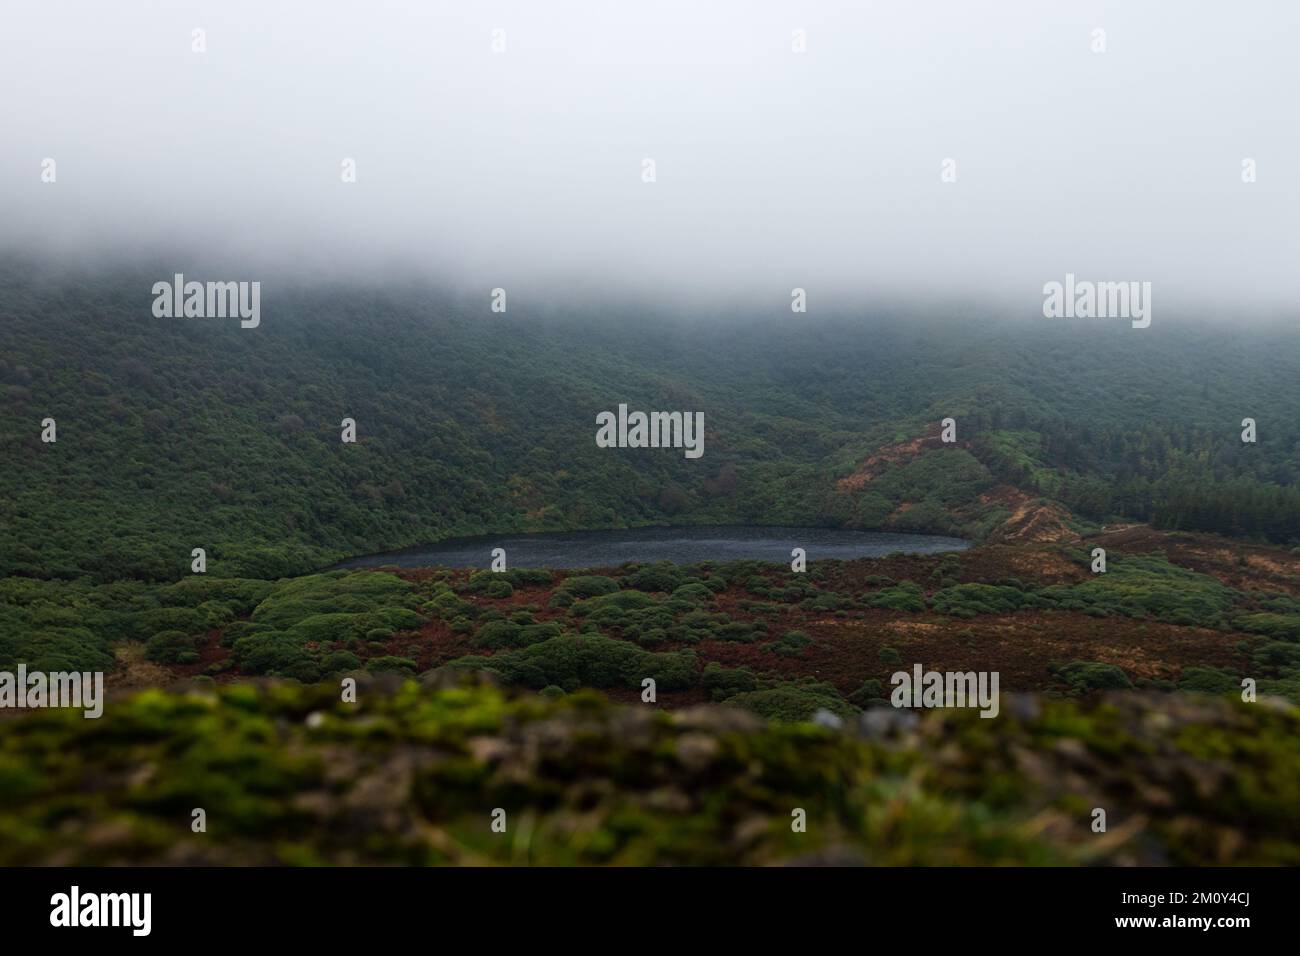 Lake in the mountains with low clouds passing by. The Bay Lough, Clogheen, Tipperary, Ireland. Stock Photo